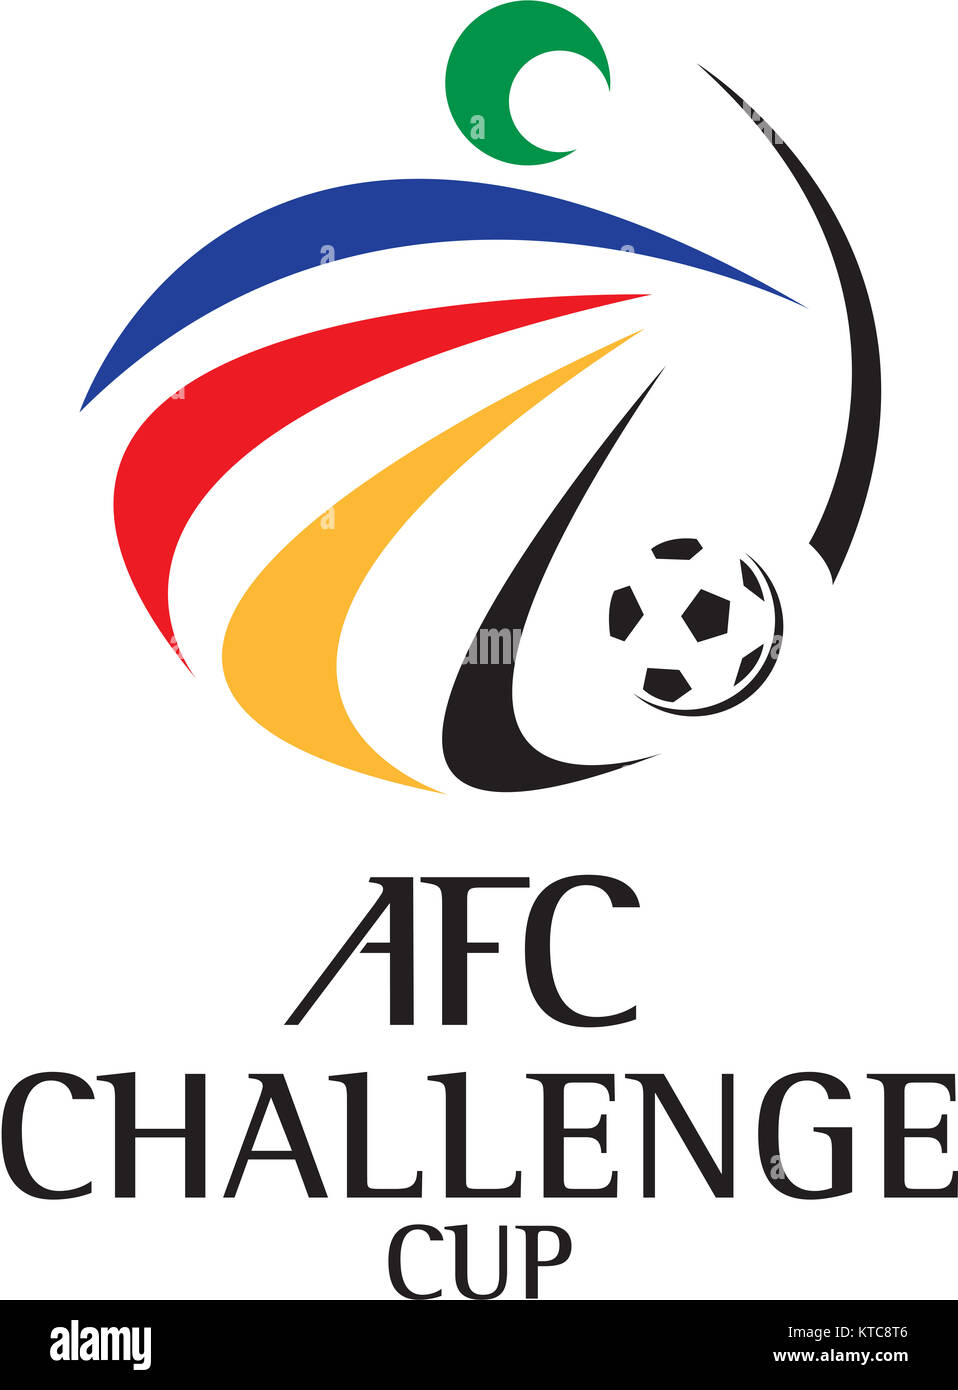 Afc challenge cup logo Foto Stock